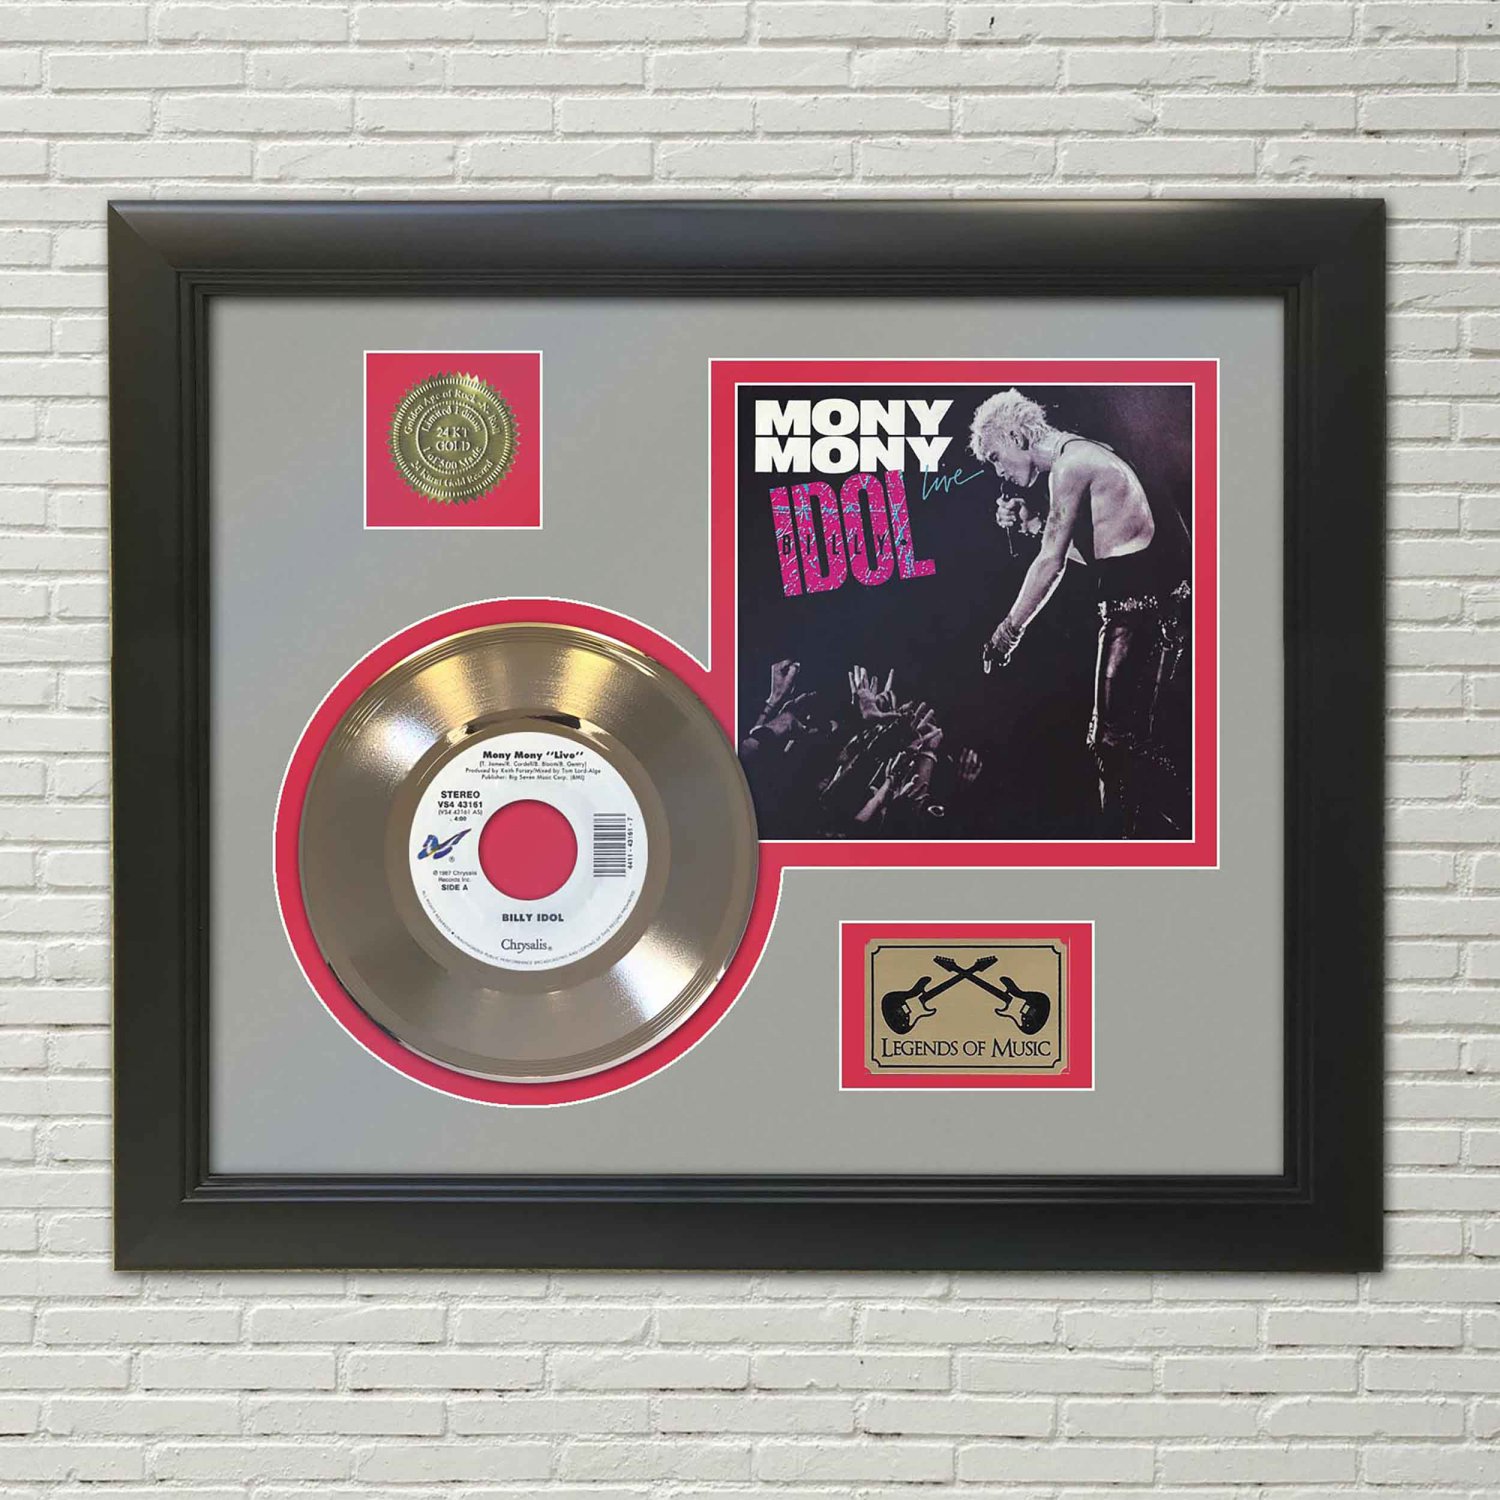 BILLY IDOL "Mony Mony" Framed Picture Sleeve Gold 45 Record Display